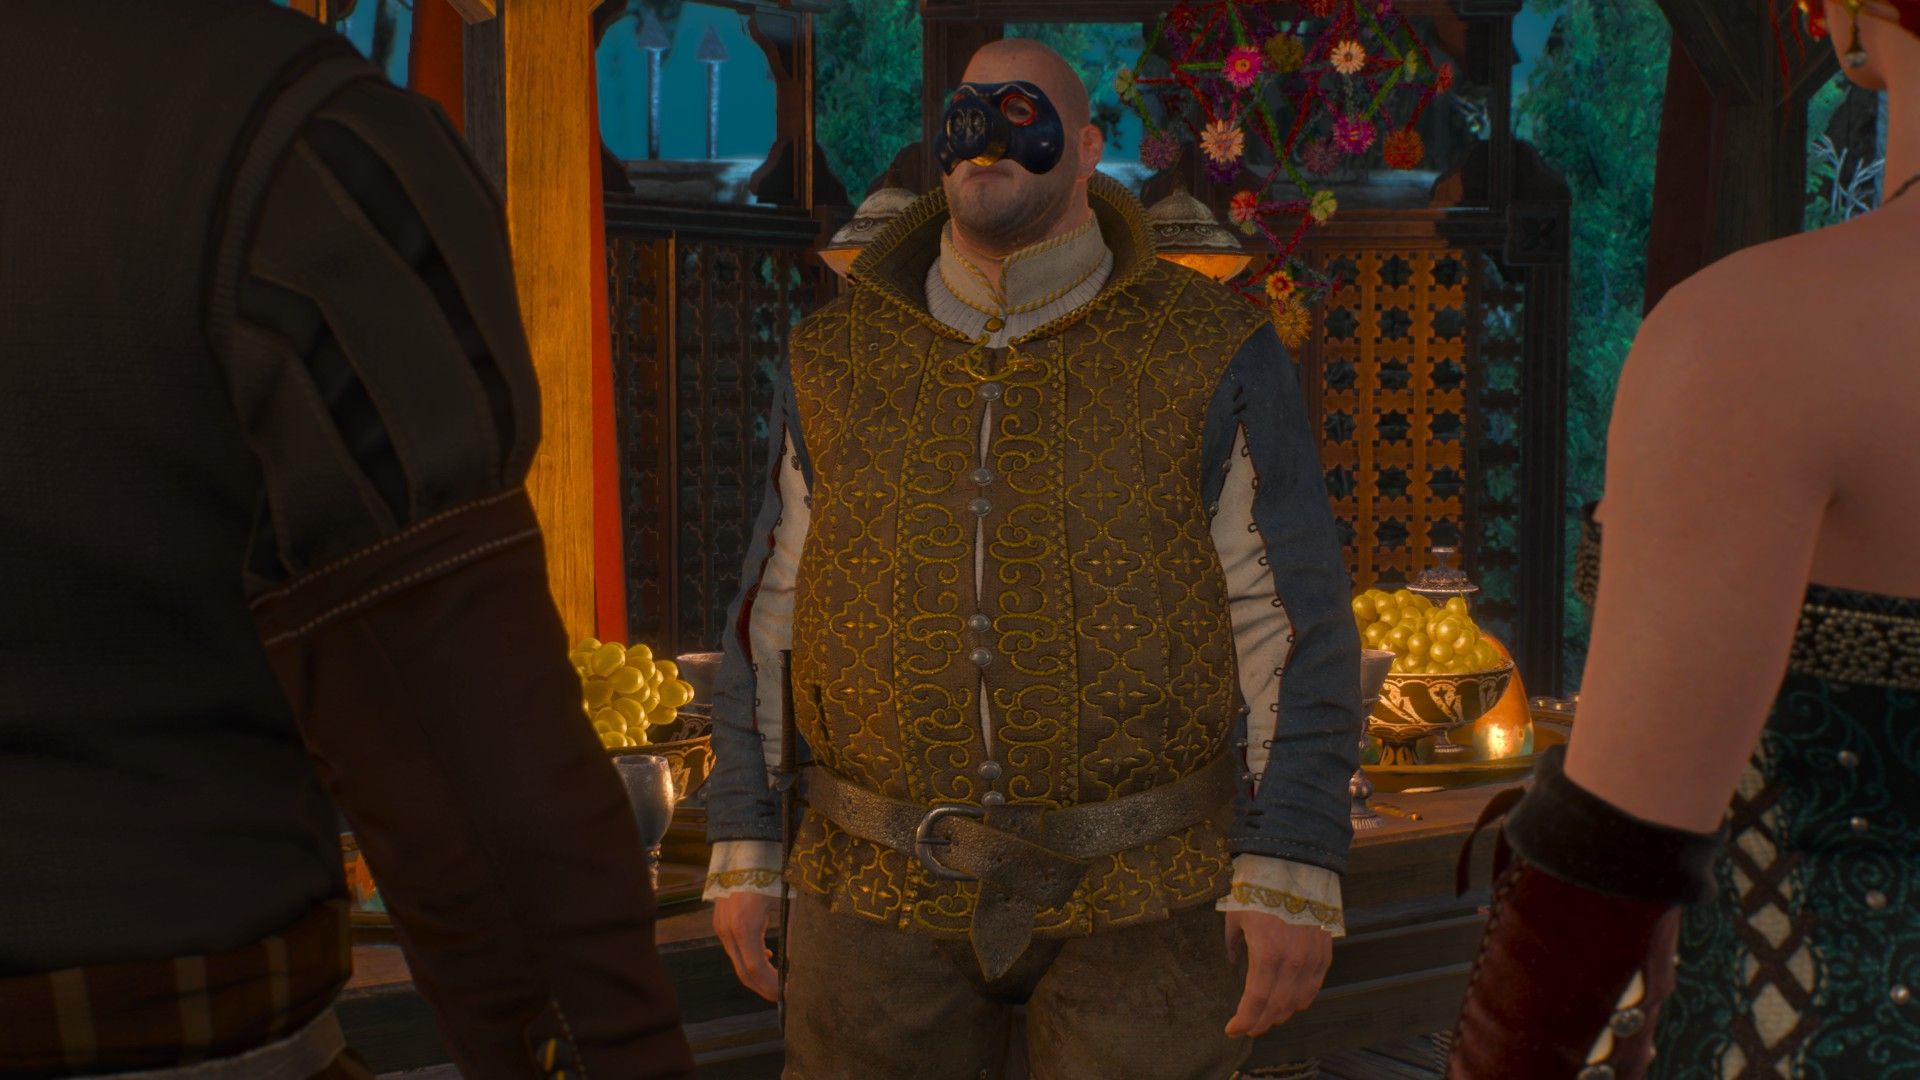 Sigi Reuven, wearing a pig mask, talks to Geralt and Triss at a ball.  They are standing next to a buffet table overflowing with food.